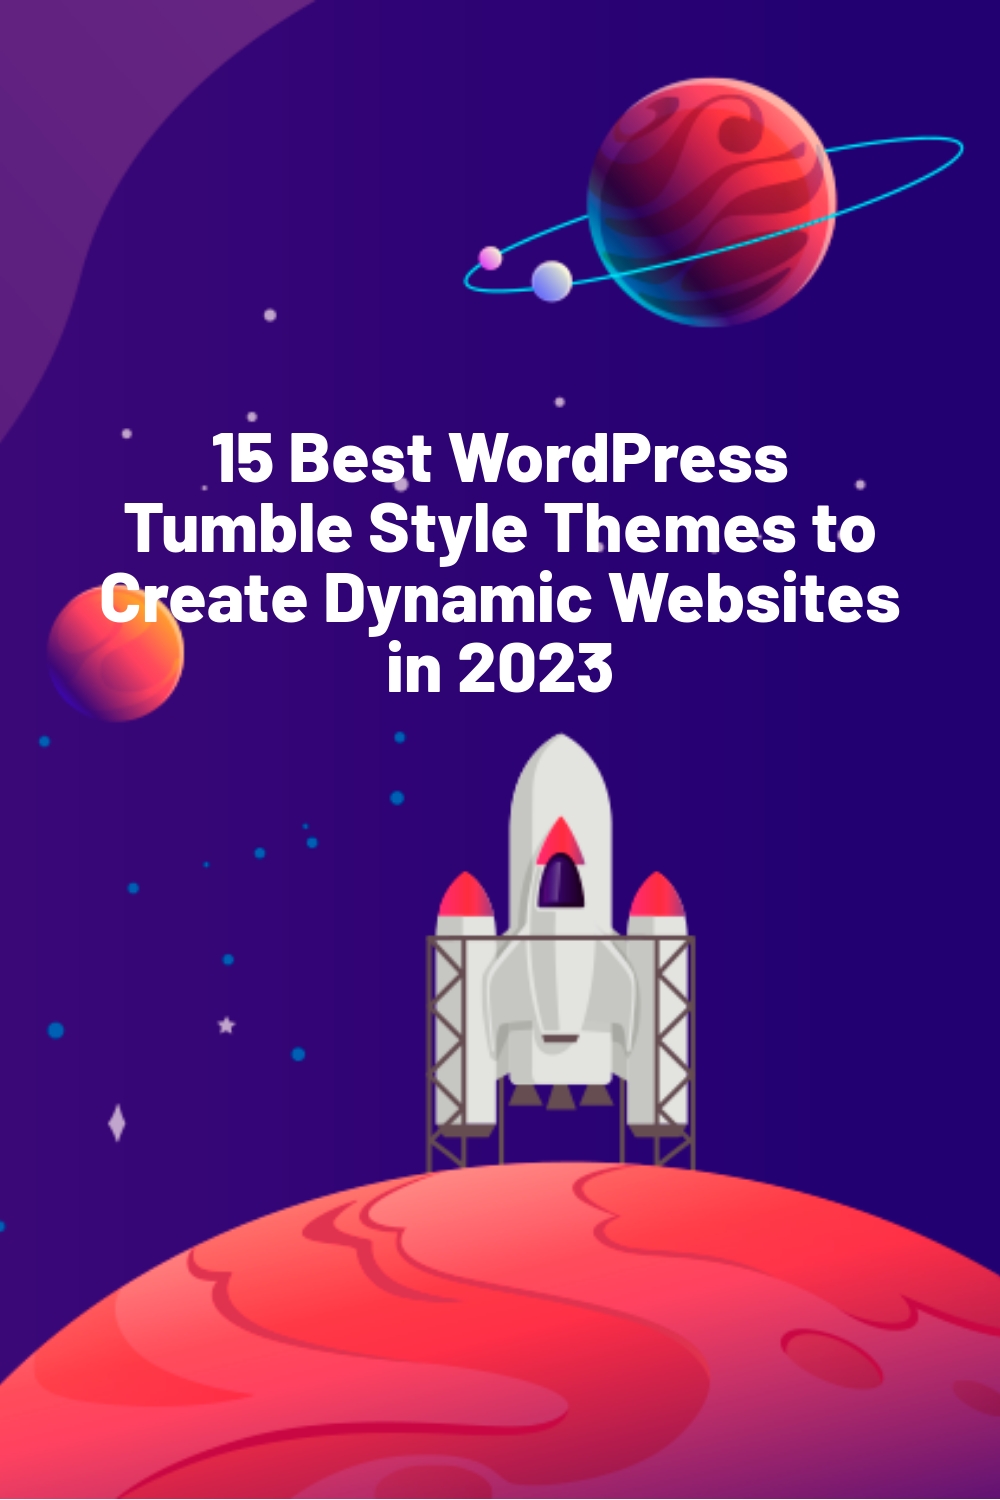 15 Best WordPress Tumble Style Themes to Create Dynamic Websites in 2023